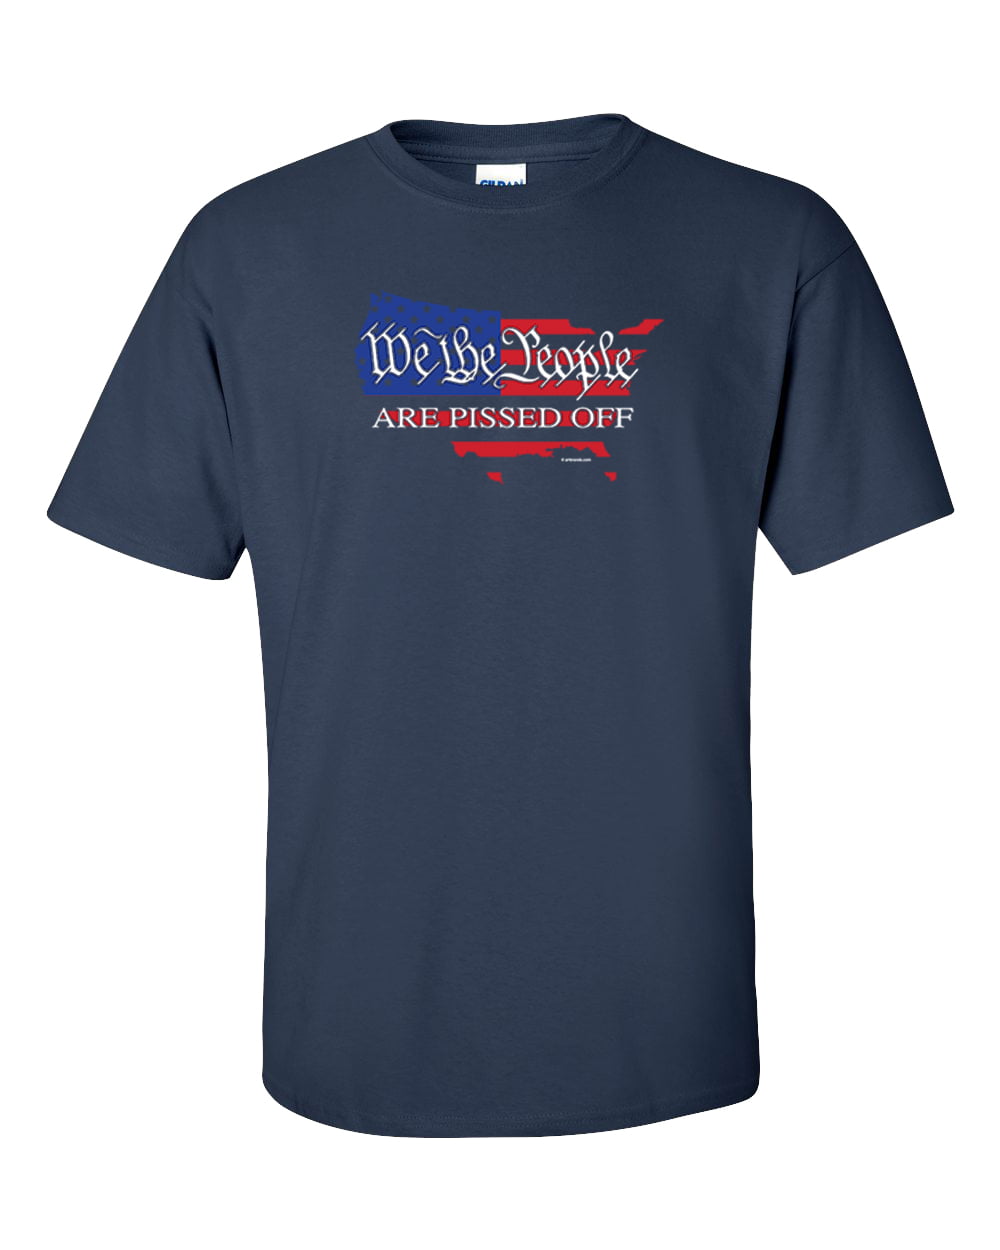 Constitution United States America All Over Adult T-Shirt